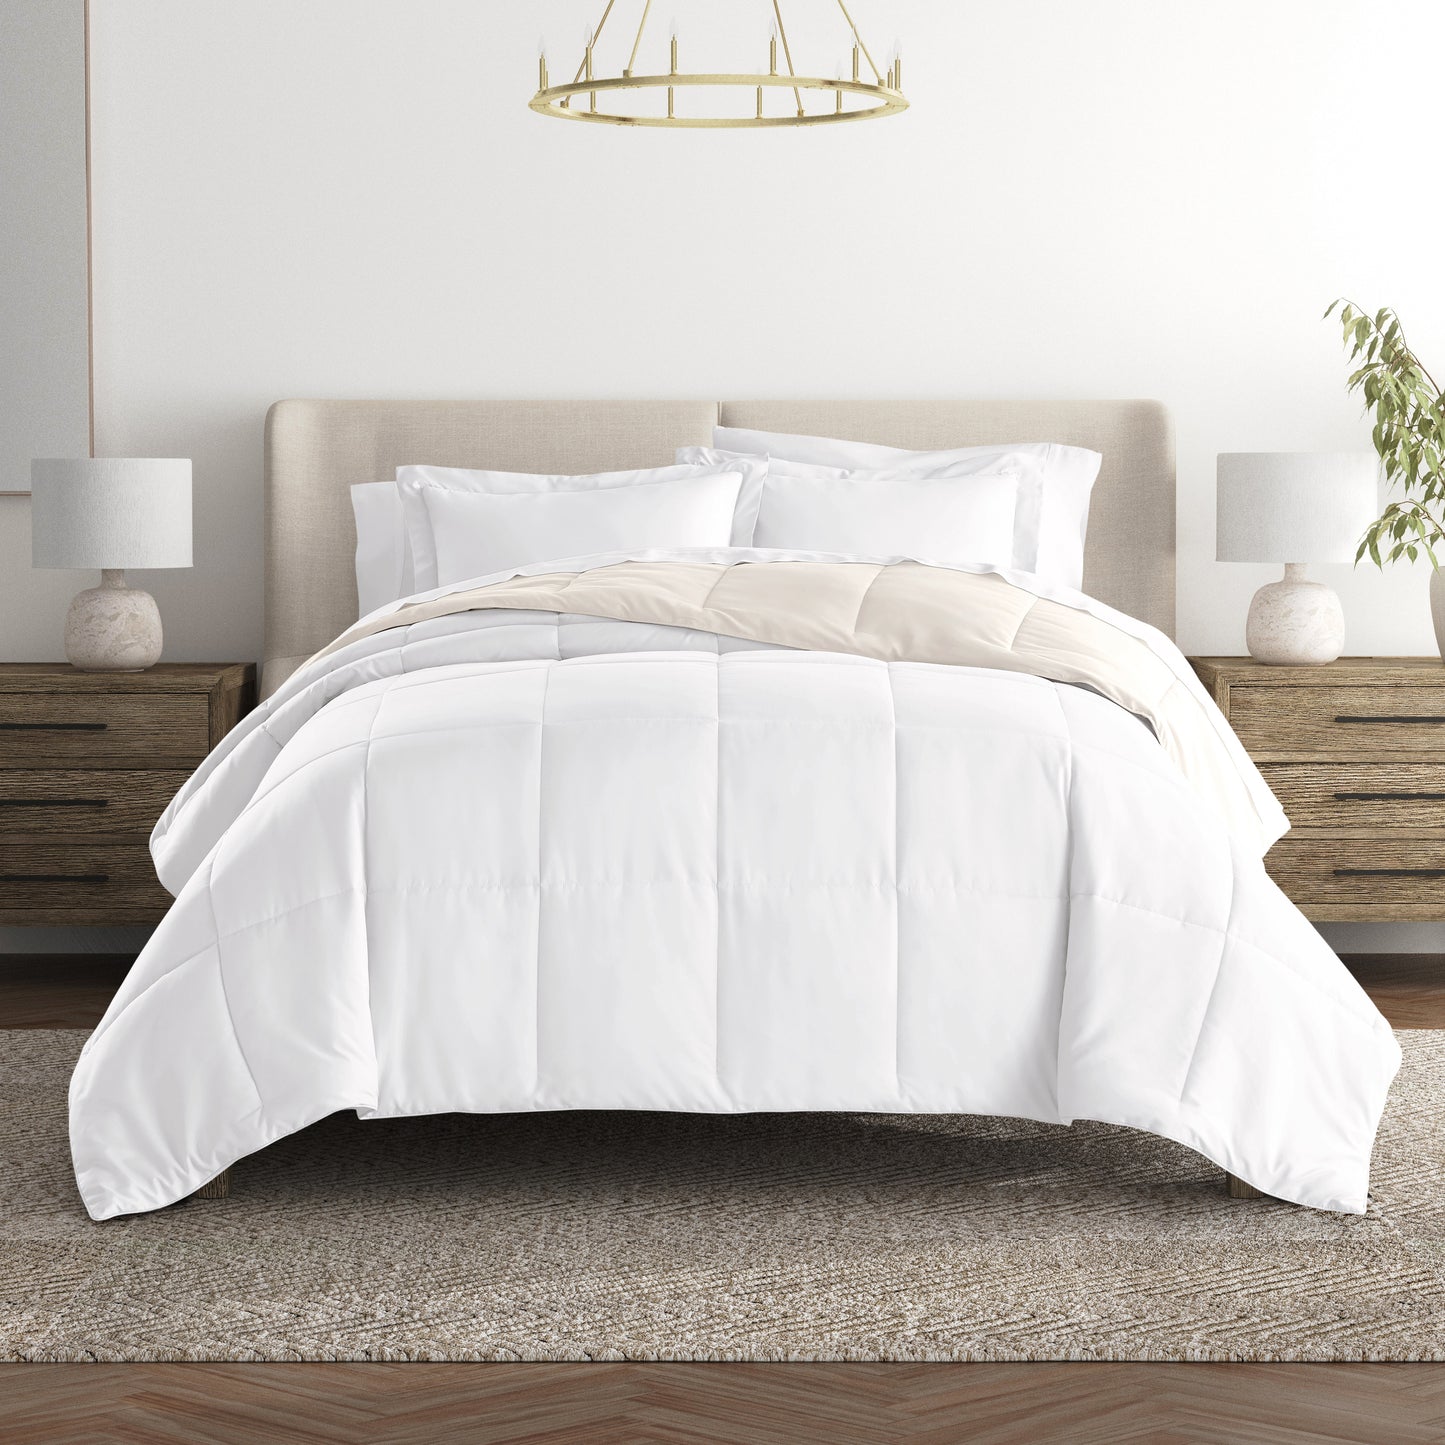 Ienjoy Home Home 3-Piece Blush and White Full/Queen Comforter Set